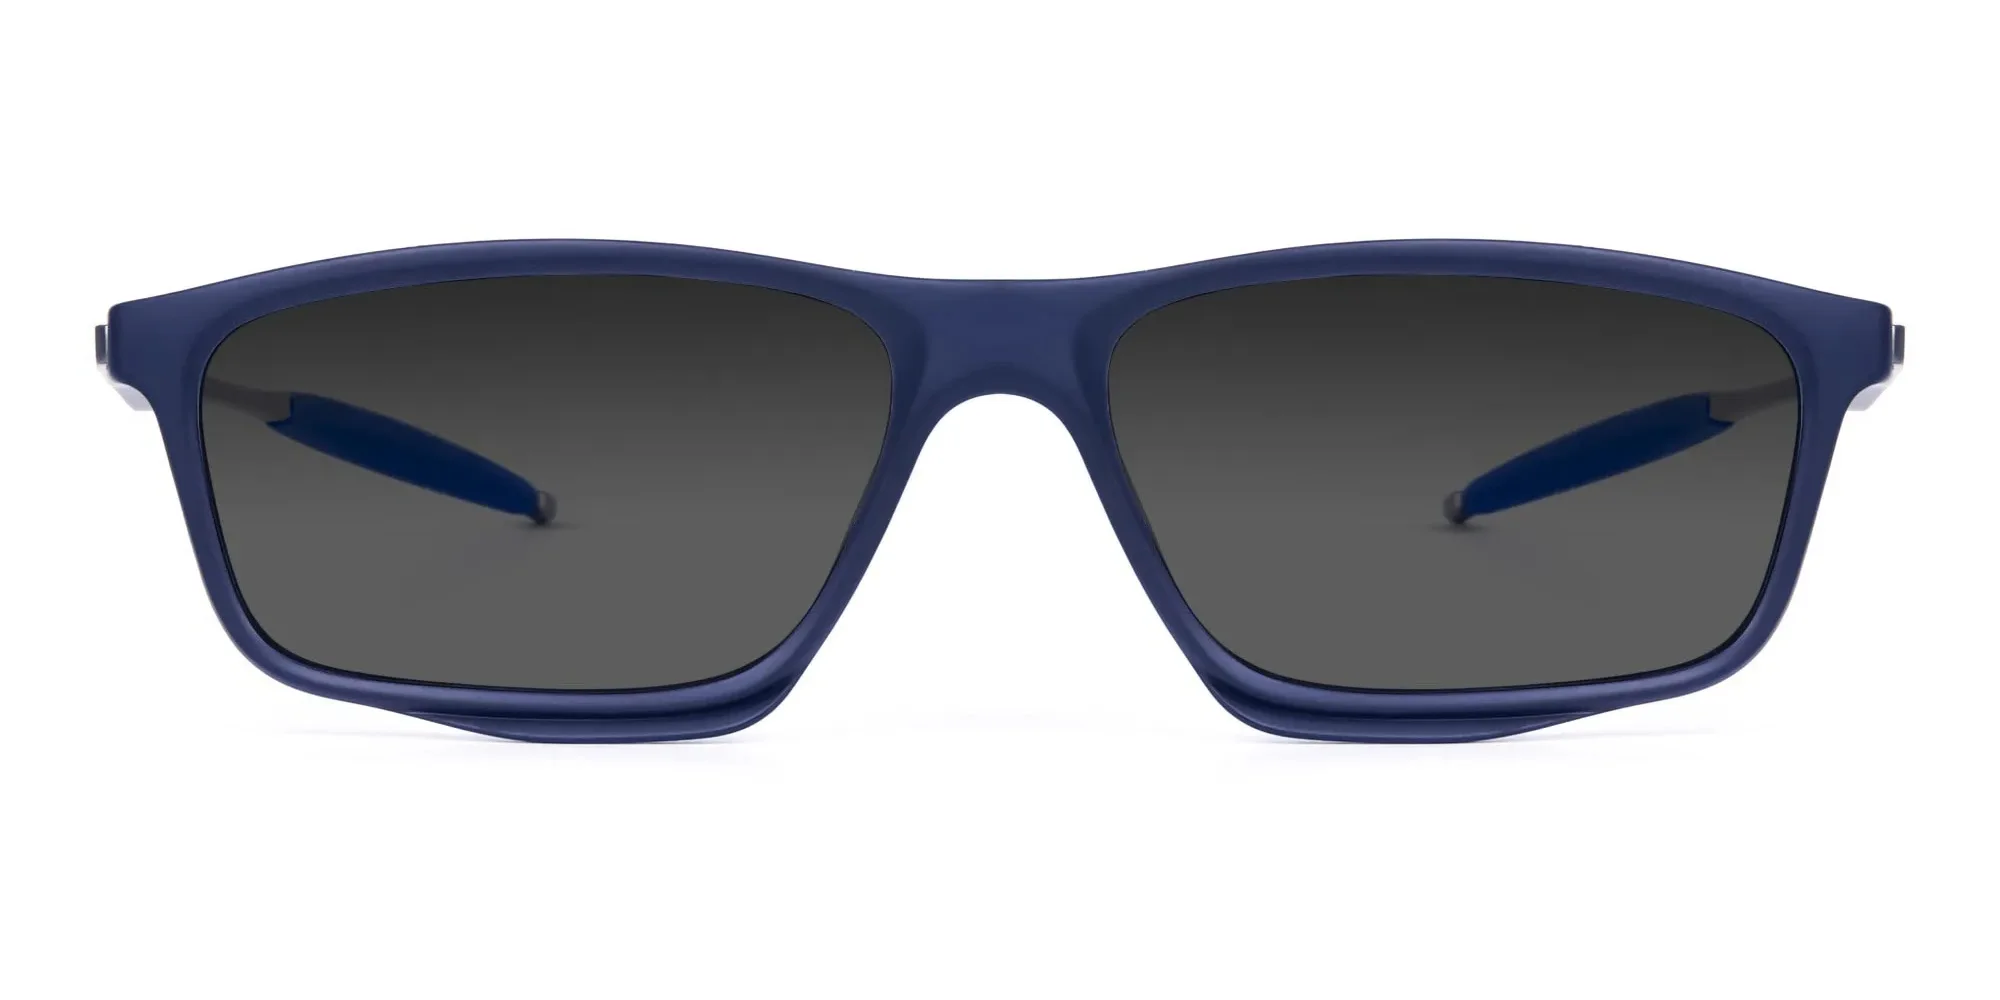 Cook 5-S - Polarized Sunglasses For Fishing | Specscart.